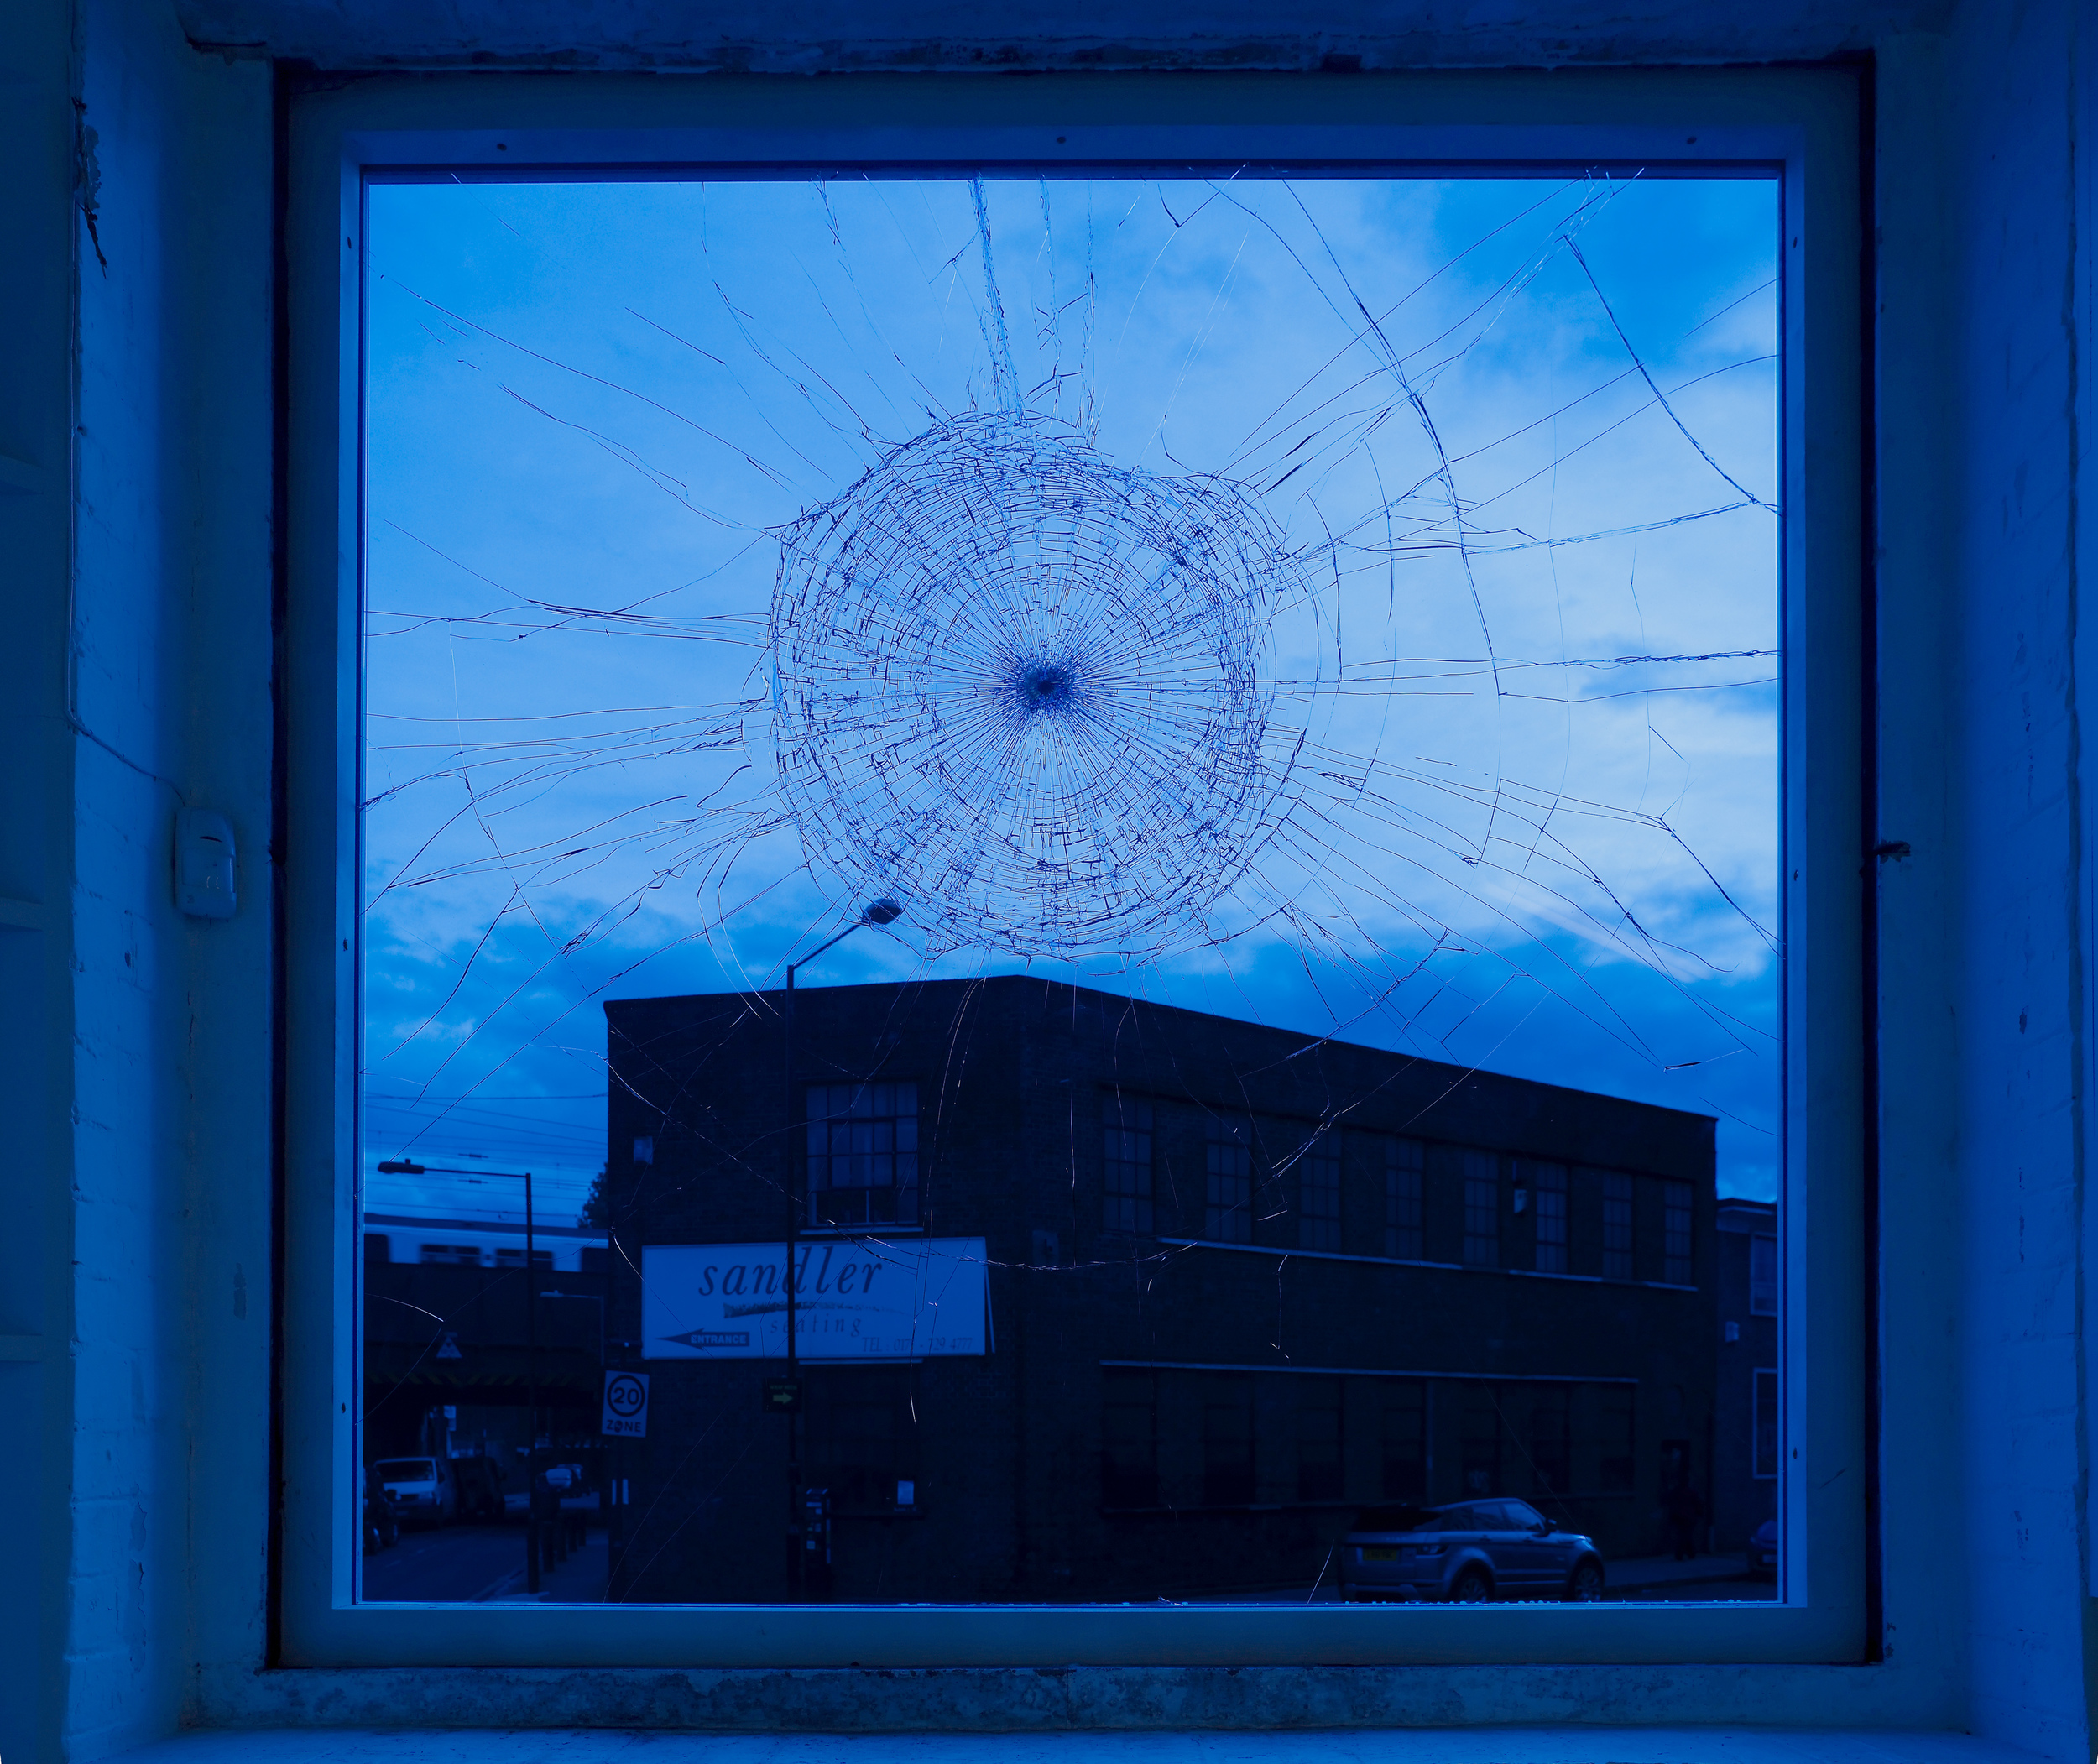      Untitled Broken Window   2012   Coloured safety glass   171 x 175 cm / 67.3 x 69.9 in  